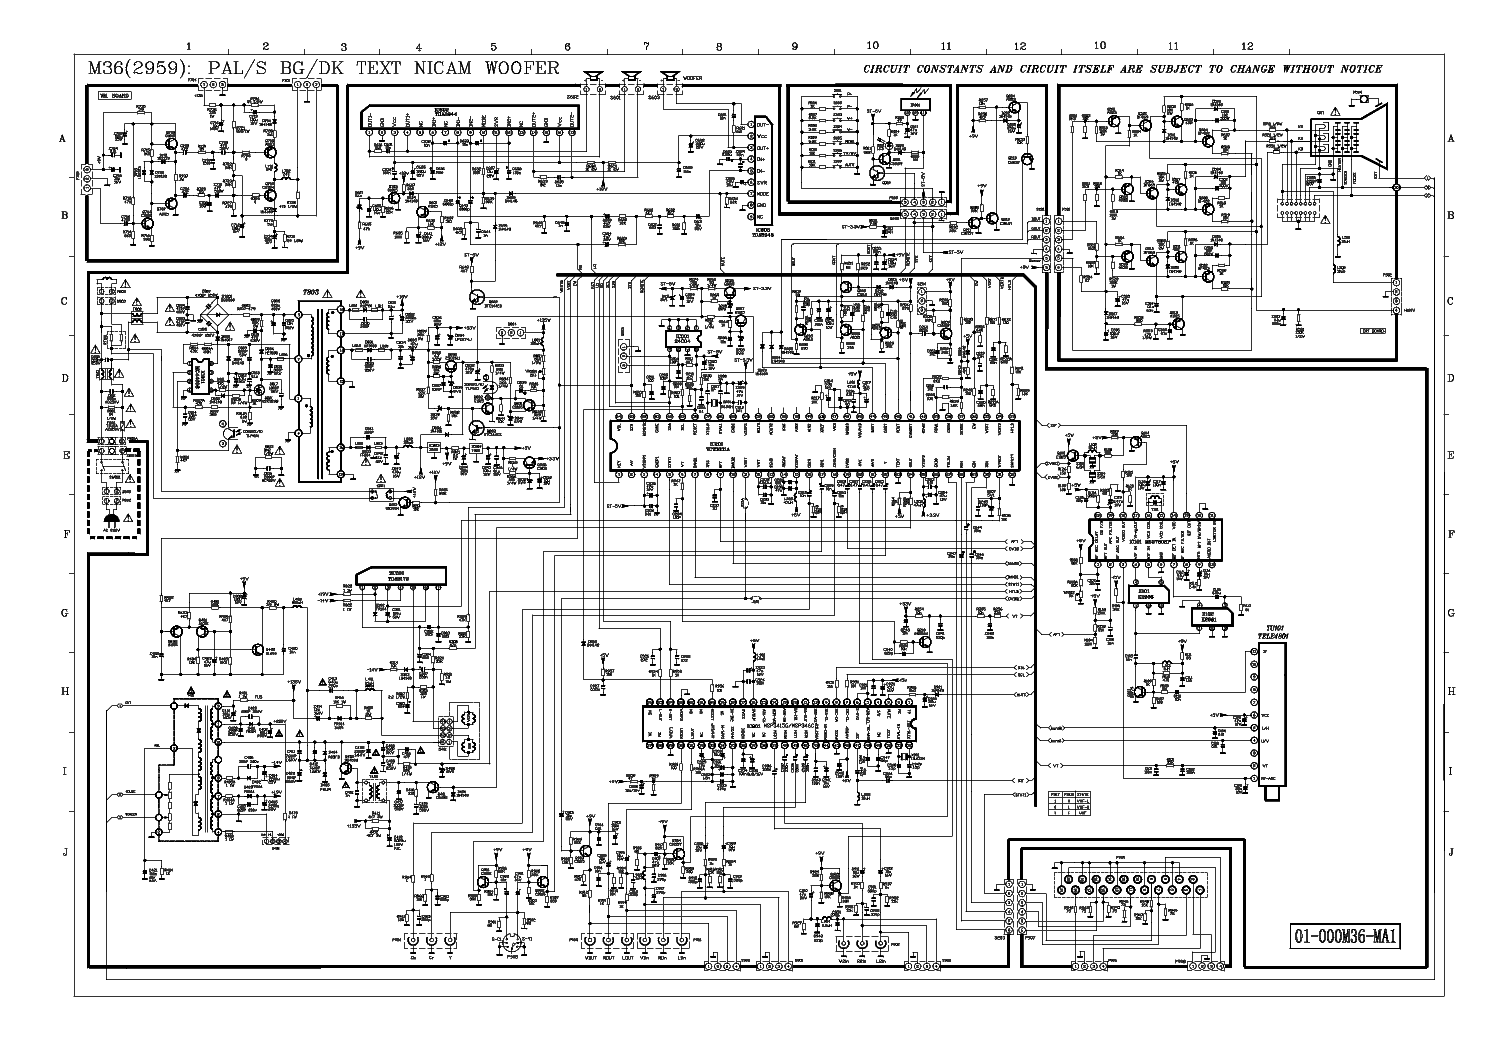 SCHNEIDER-CHINA CHASSIS M35-M36 service manual (2nd page)